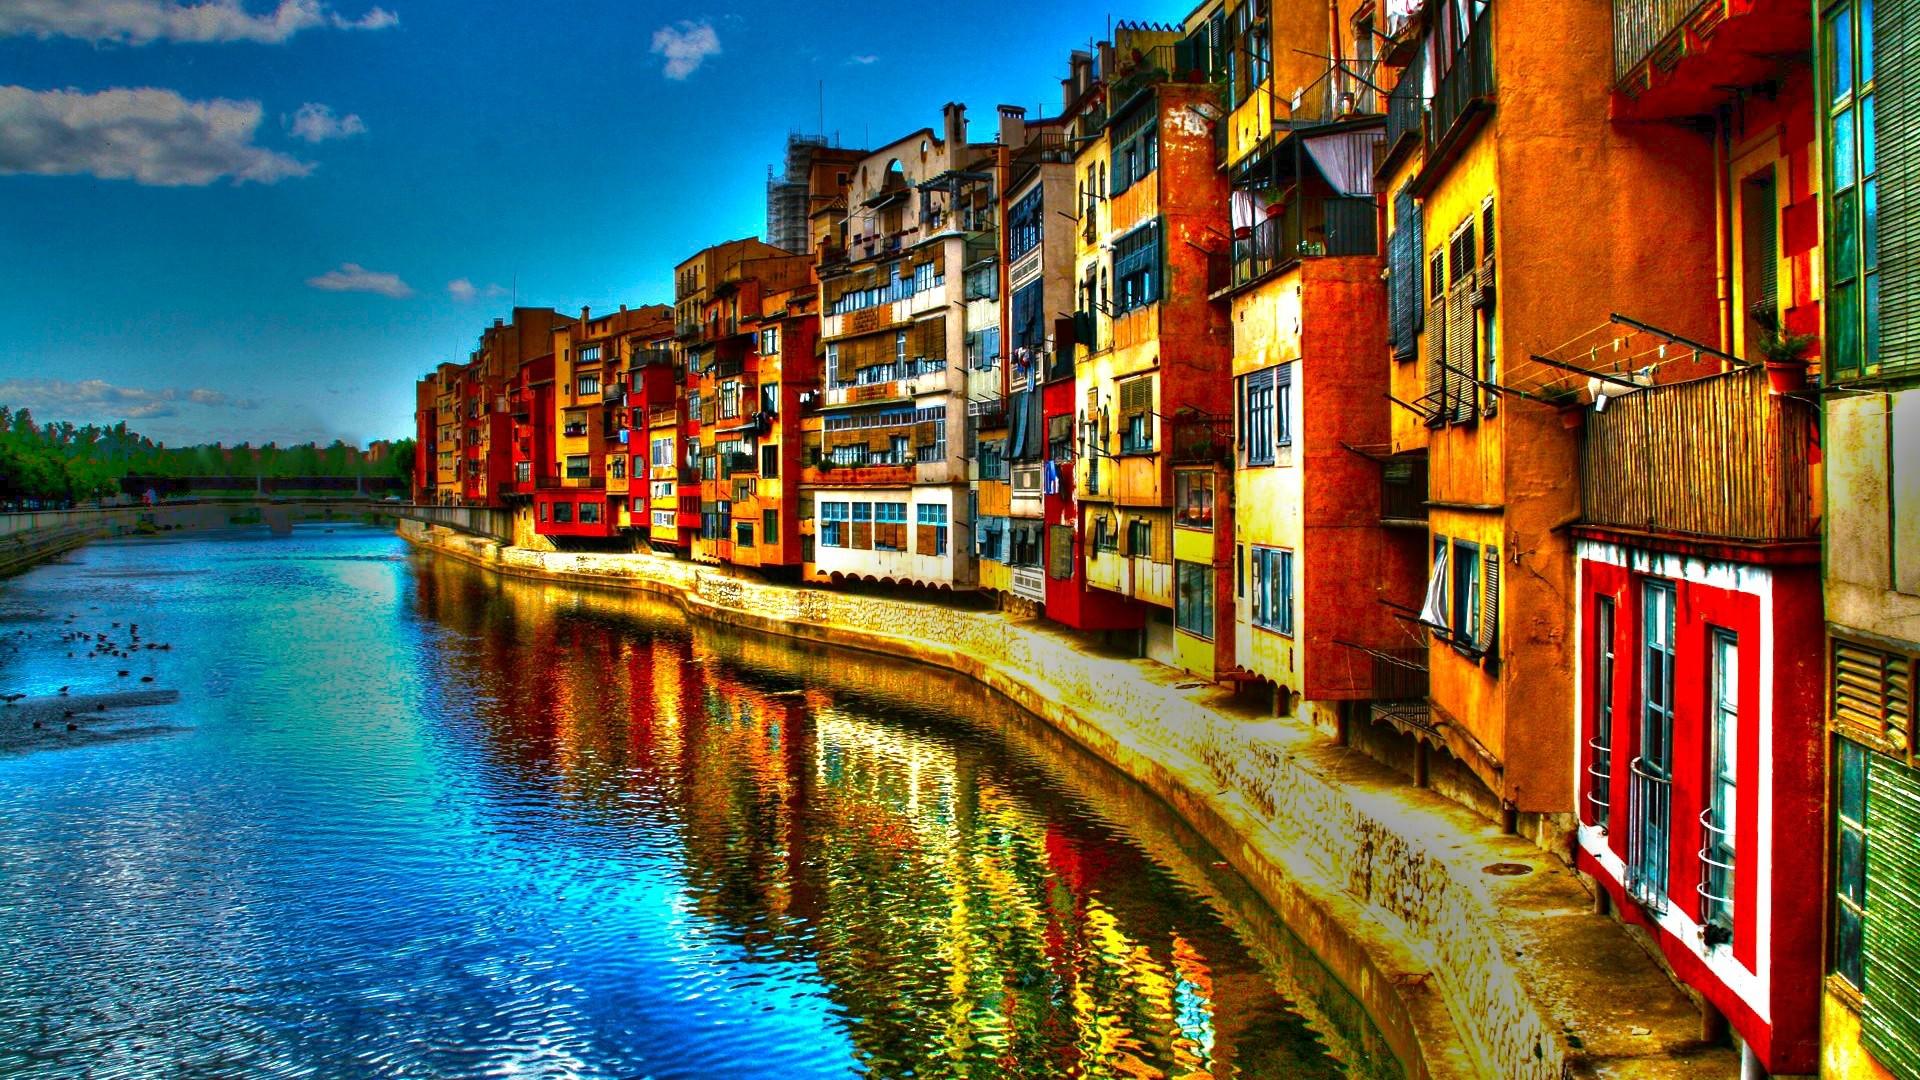 Houses at italian river - (#87774) - High Quality and Resolution ...